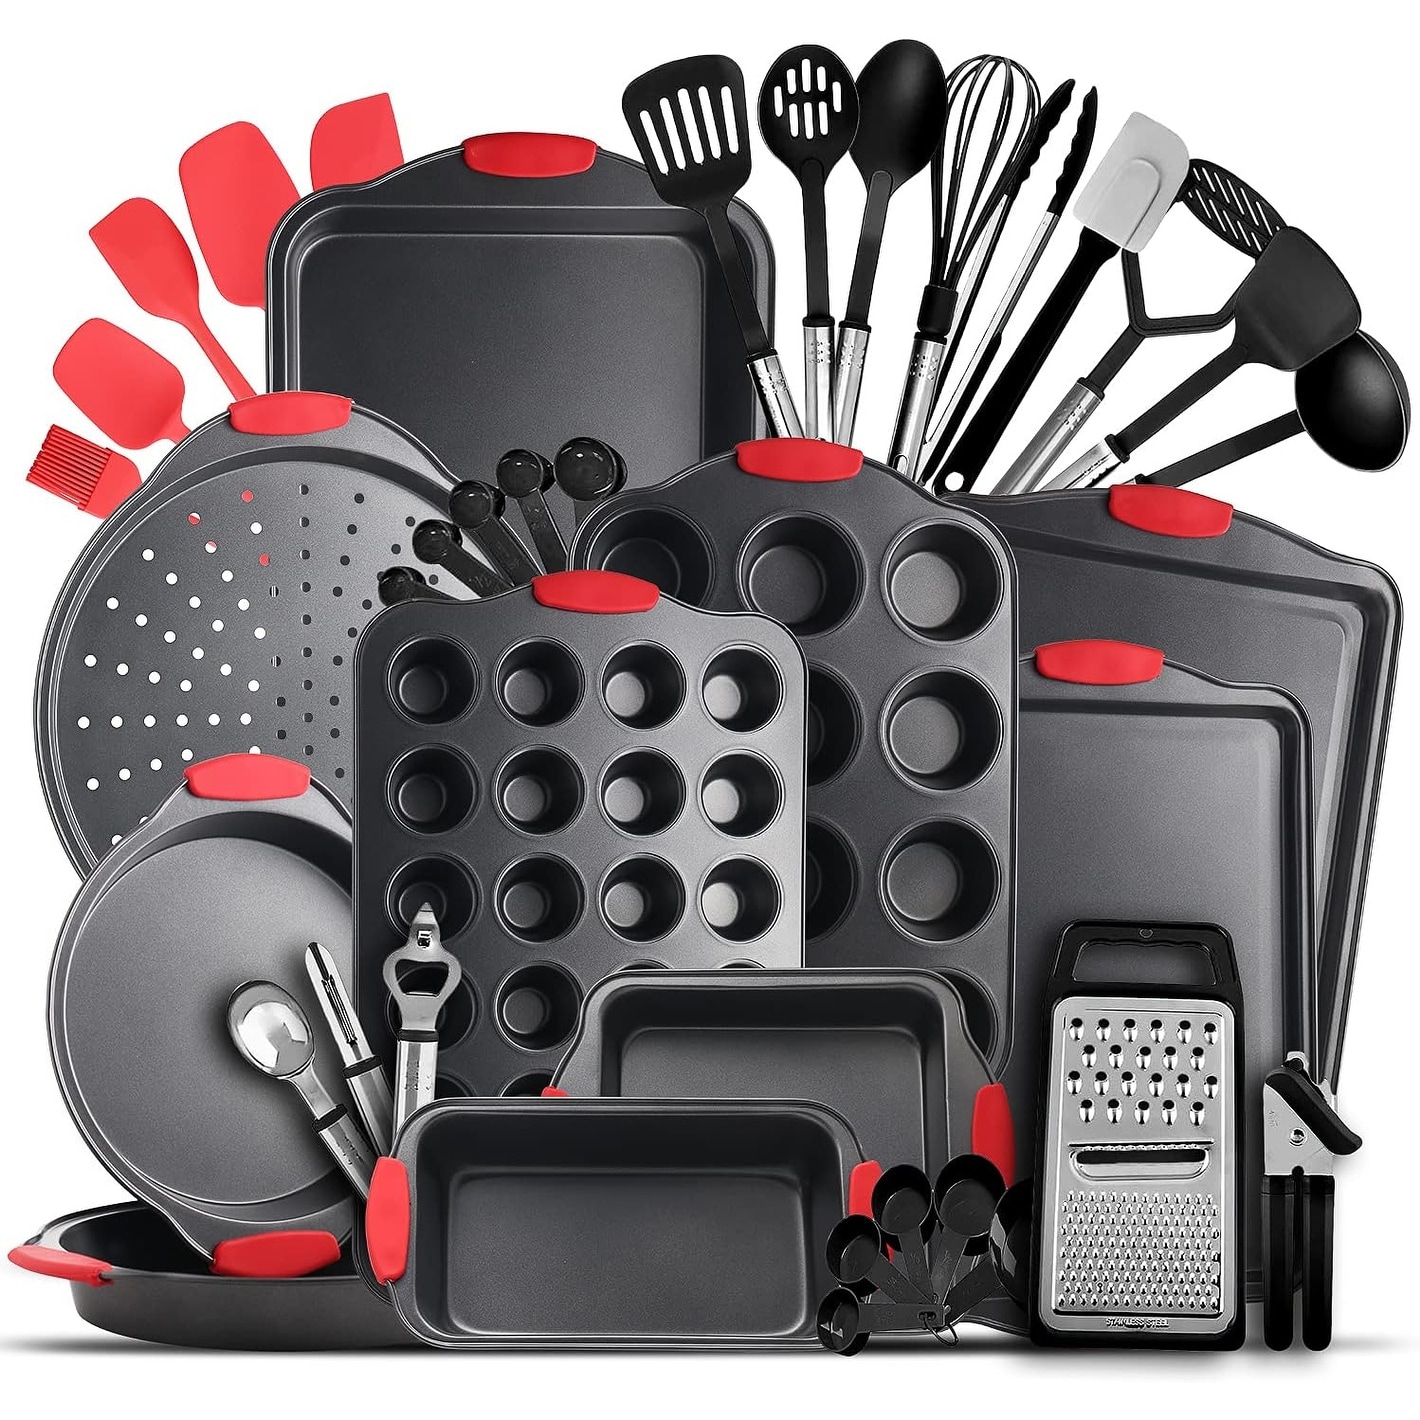 Oster Bastone 23 Piece Nonstick Cookware Bakeware Set in Speckled Gray